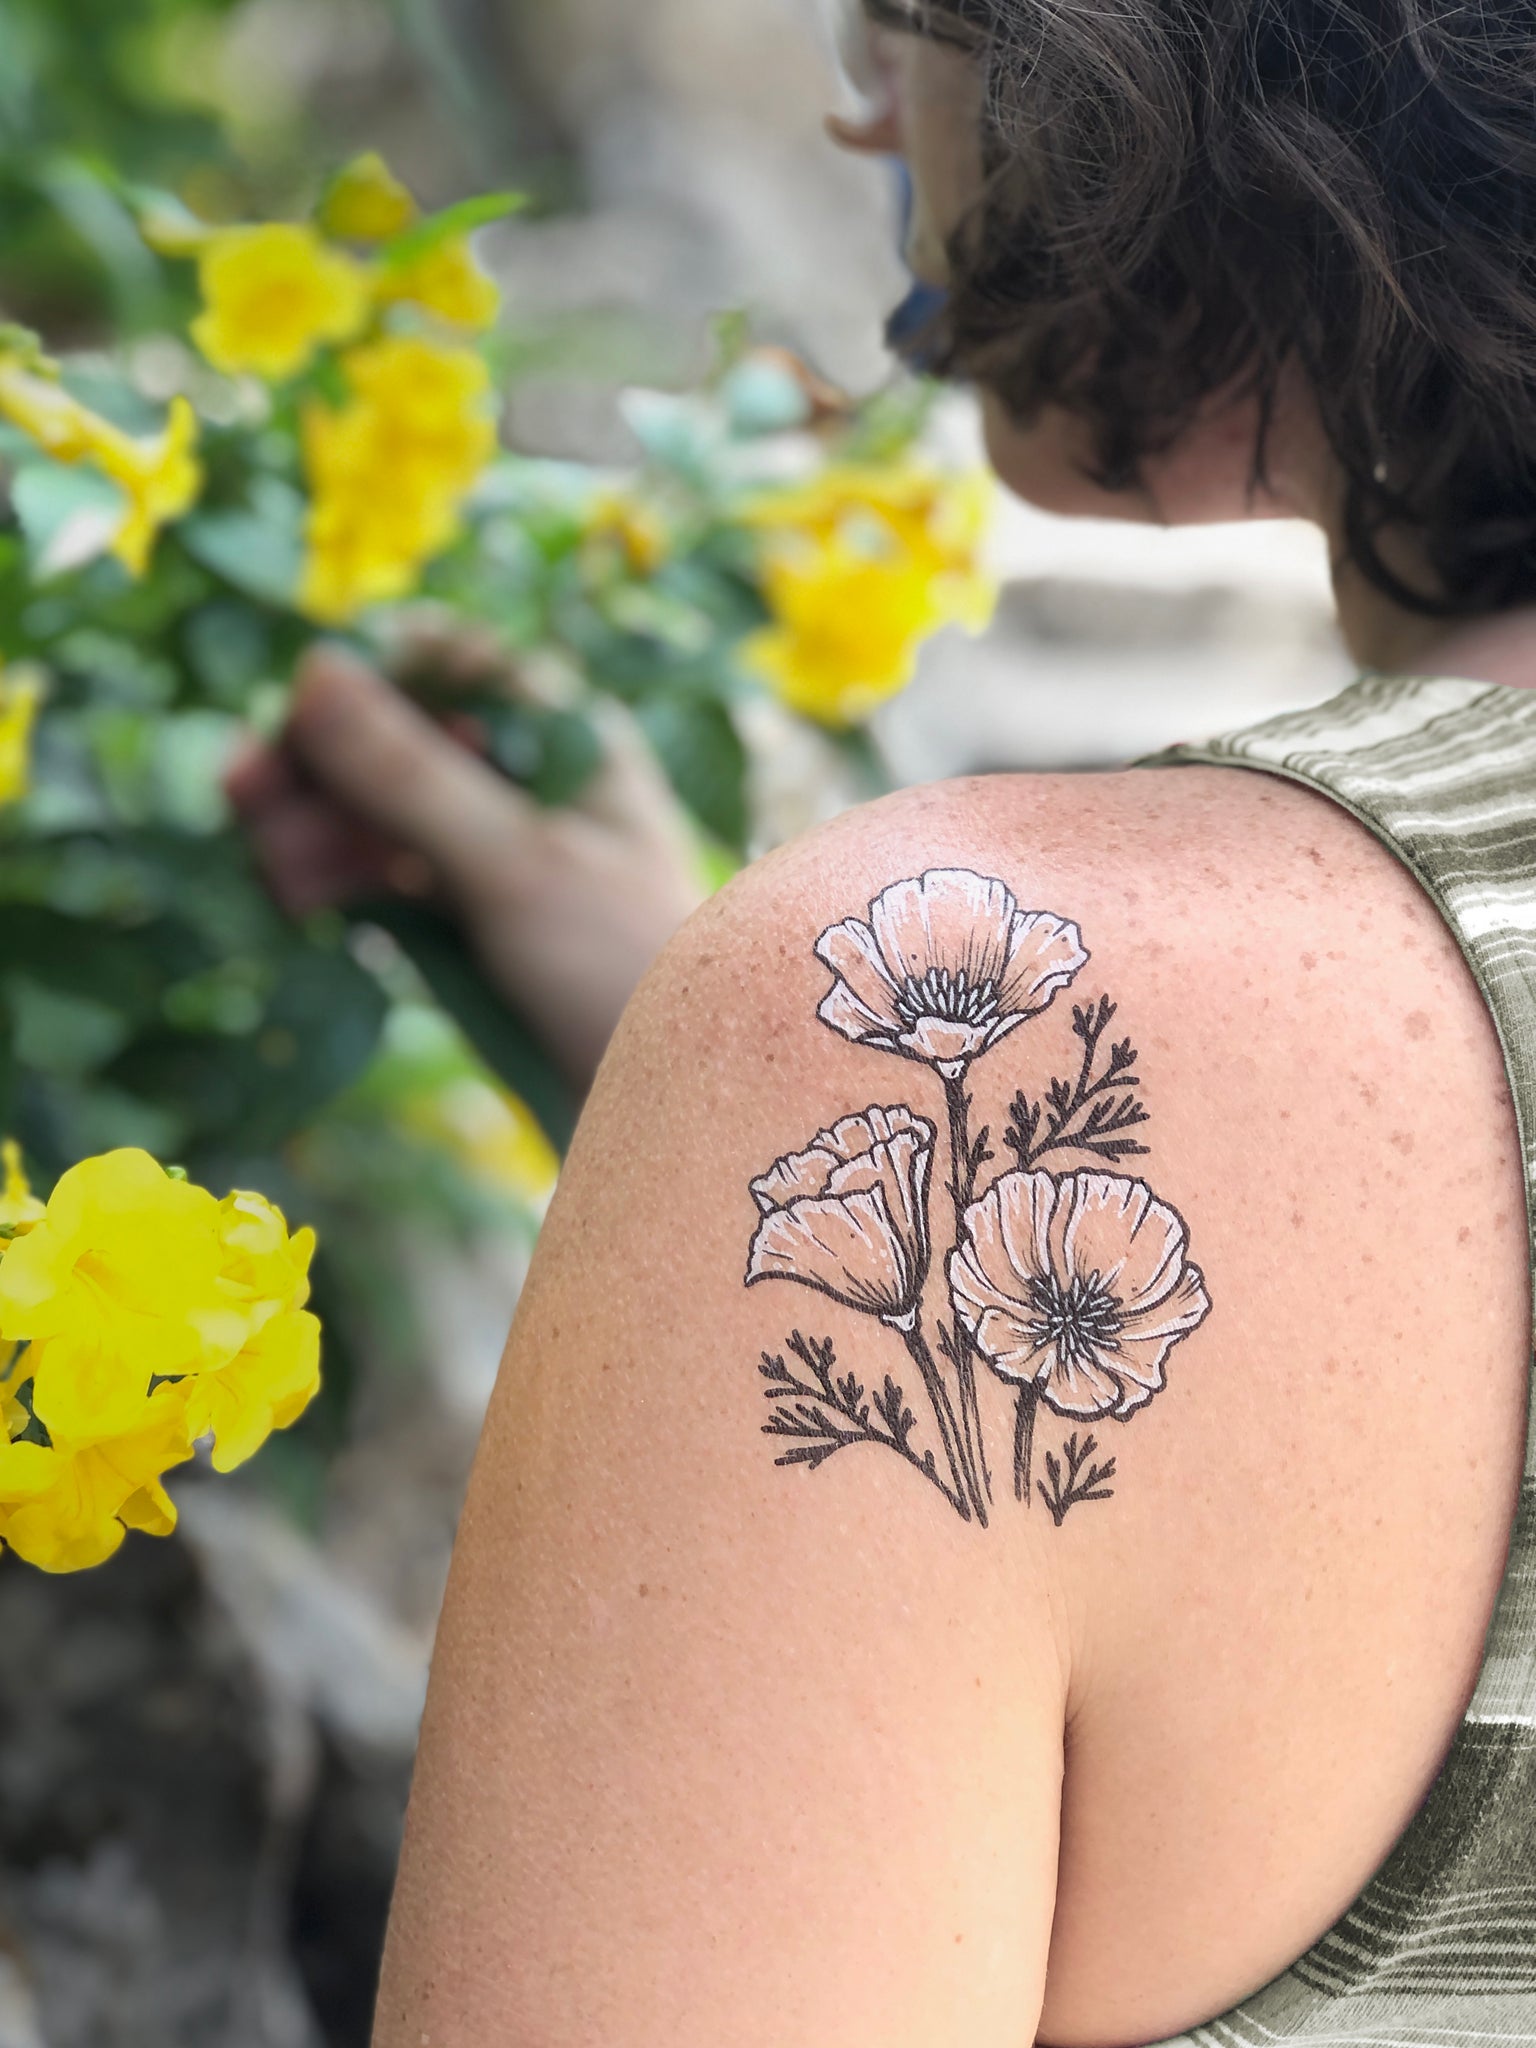 Funhouse Tattoo  Some California poppy flowers by  Facebook